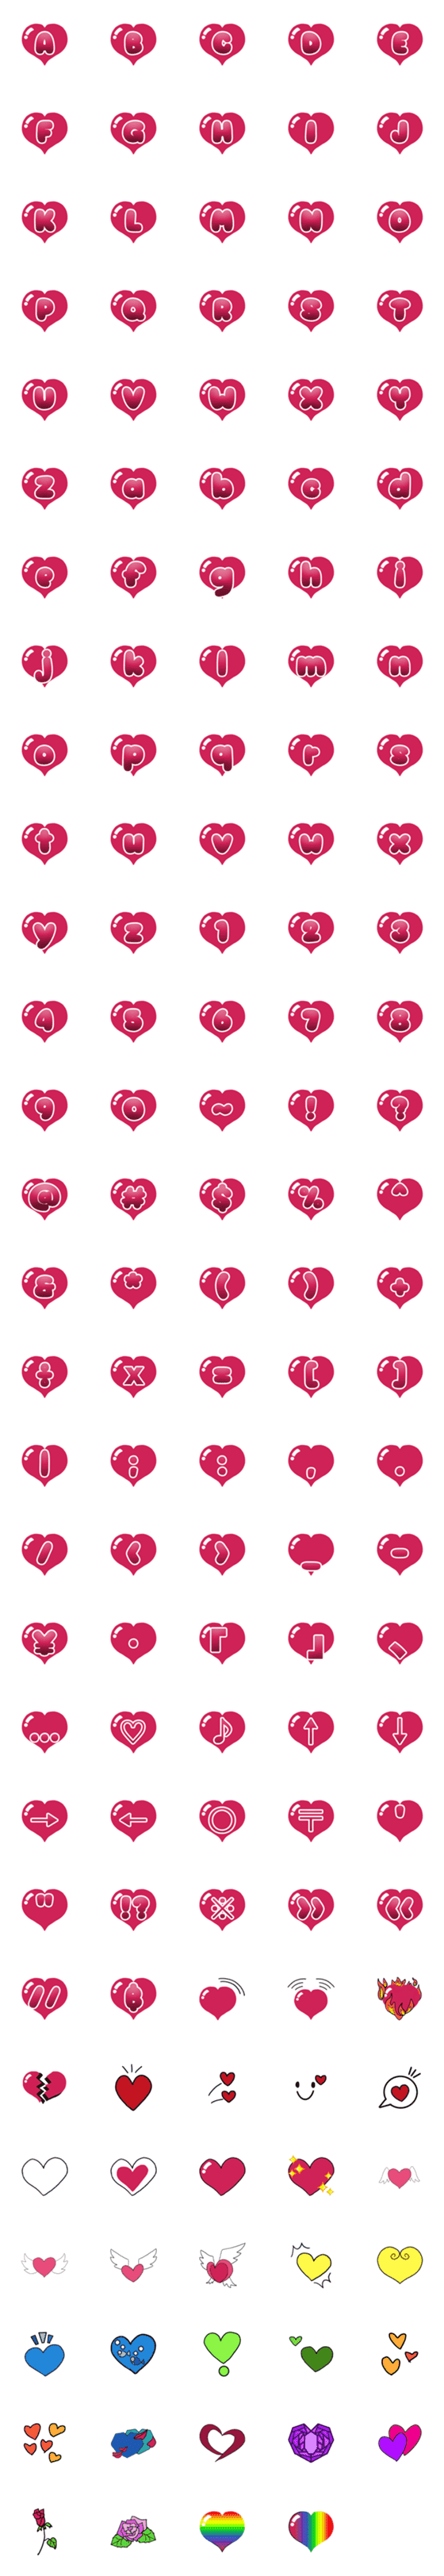 [LINE絵文字]HEART LETTERS EMOJI ＆ NUMBERの画像一覧